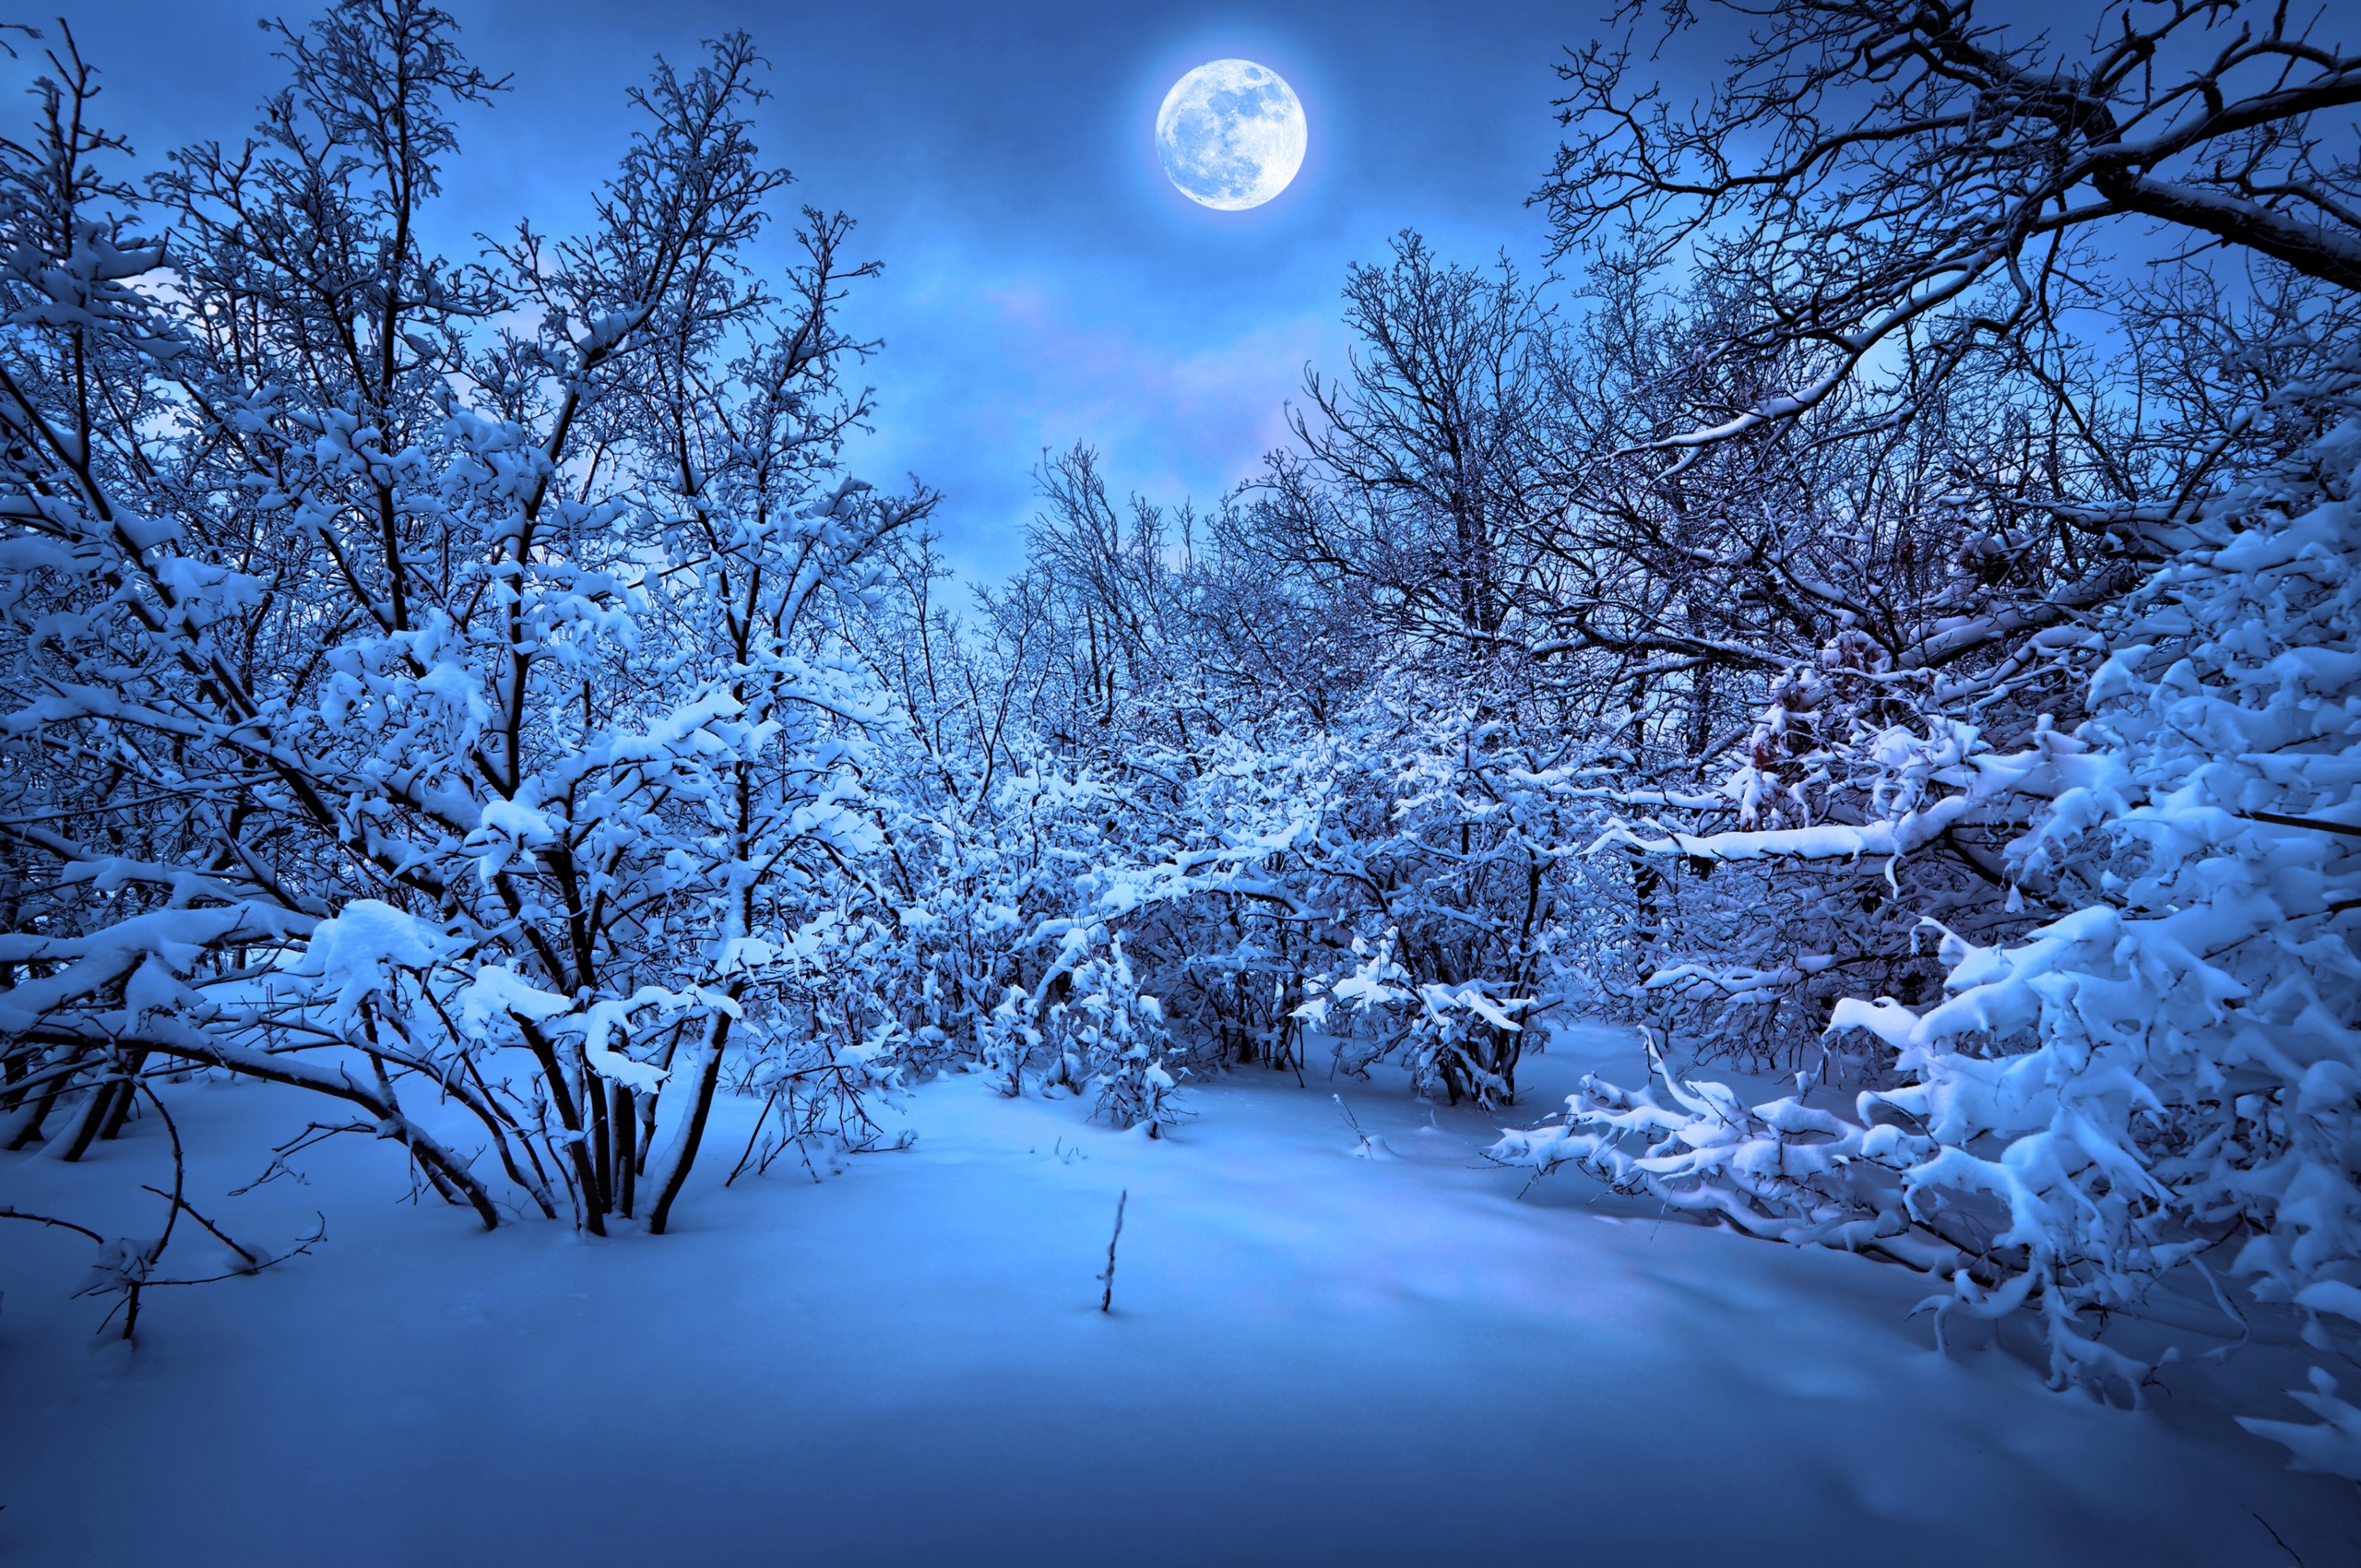 Moonlight On The Snowy Woods